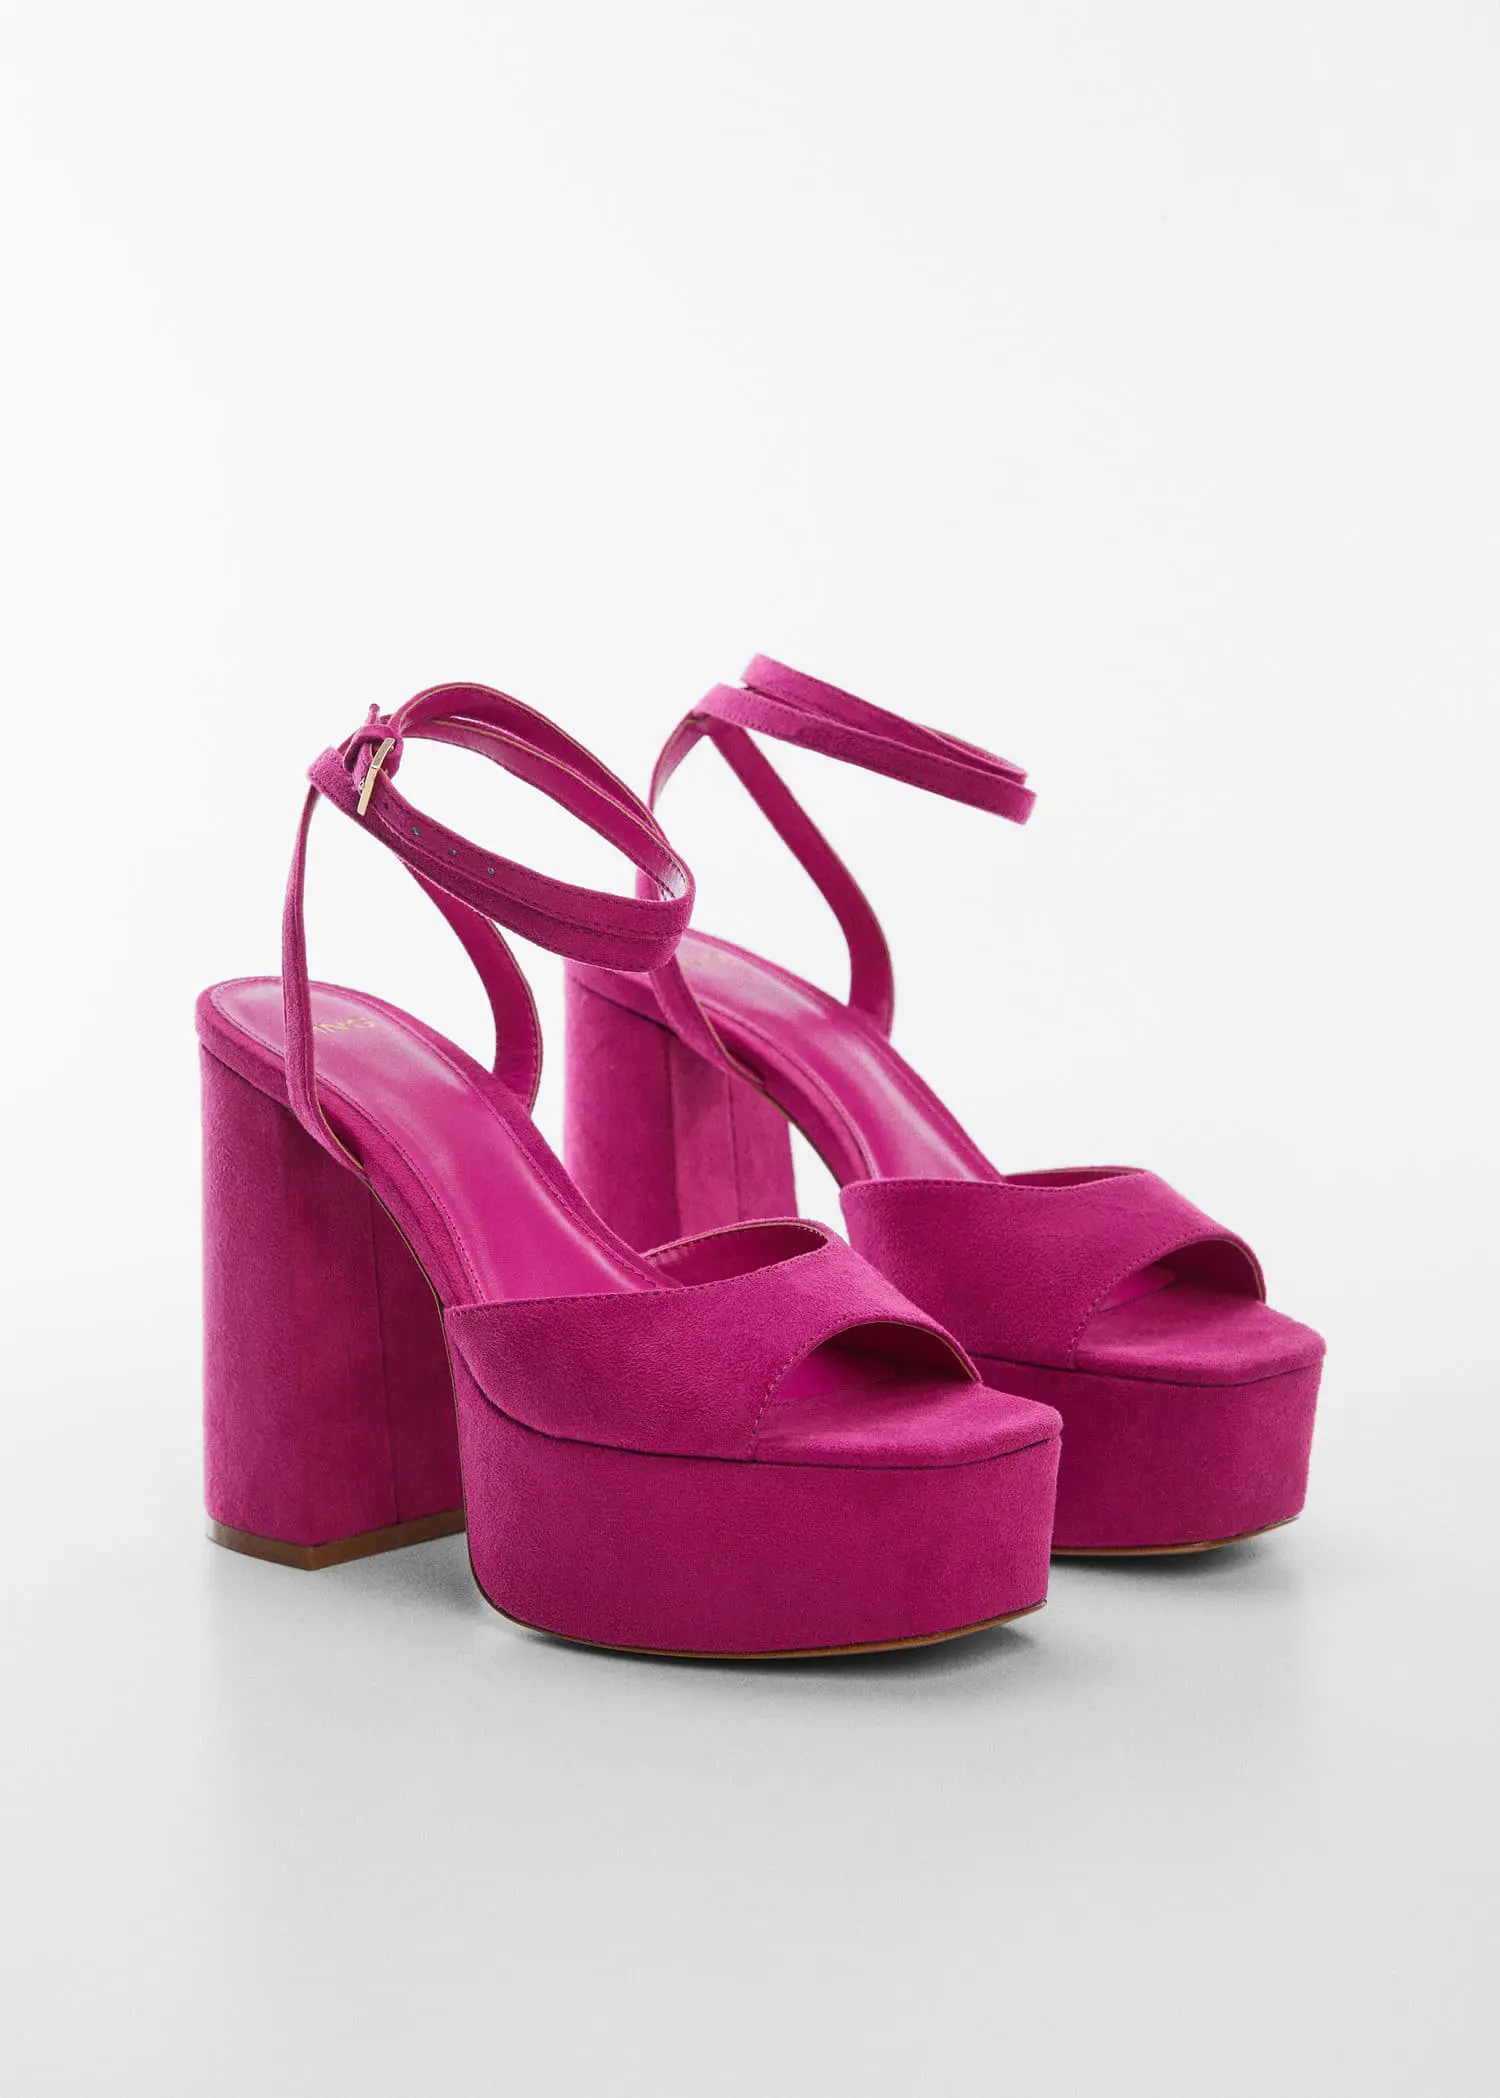 Mango Platform ankle-cuff sandals. a pair of pink high heel shoes on a white surface. 